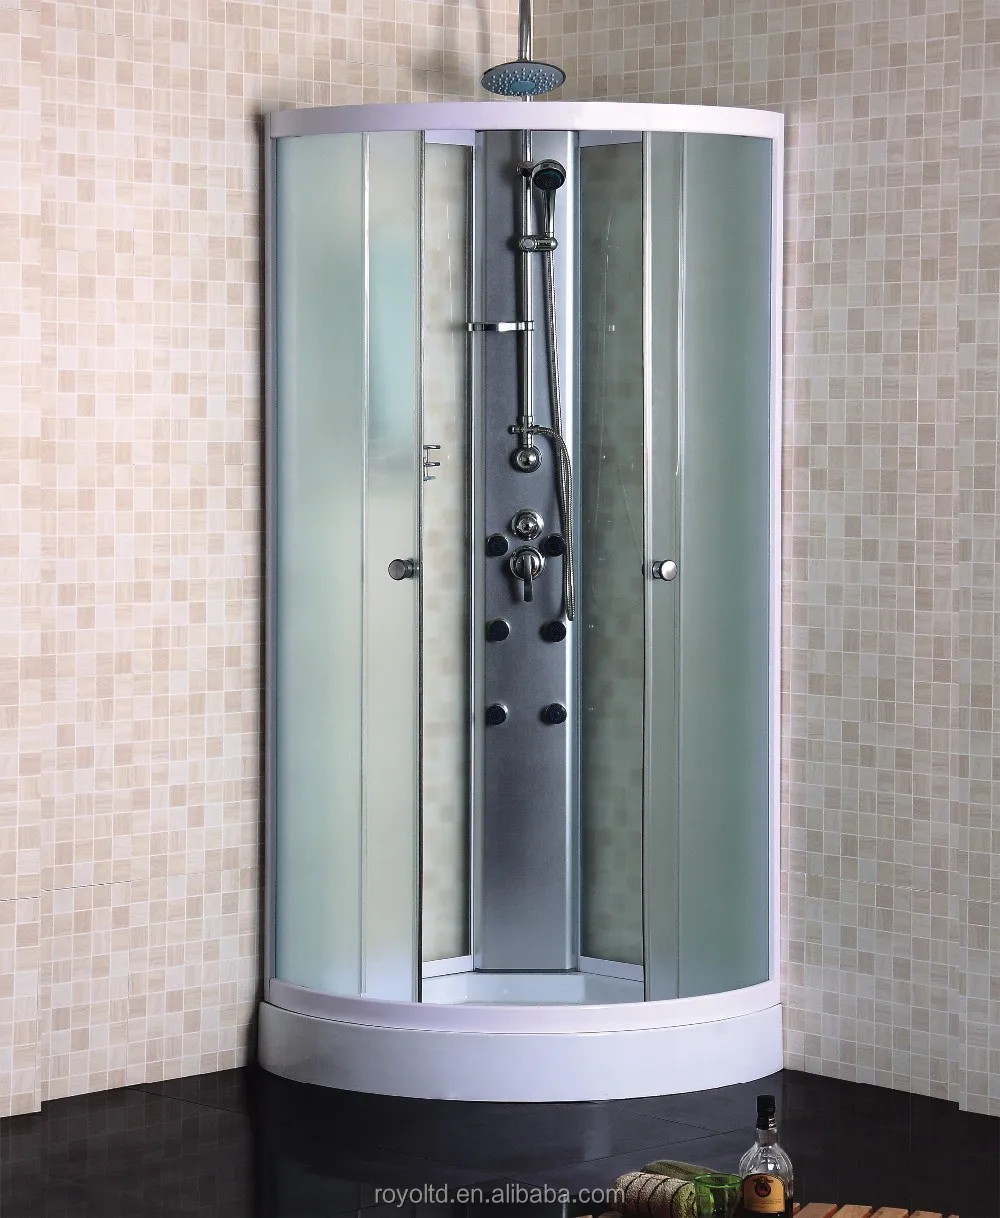 Cheap Indoor Portable Bathroom Shower Cabin Complete Shower Units